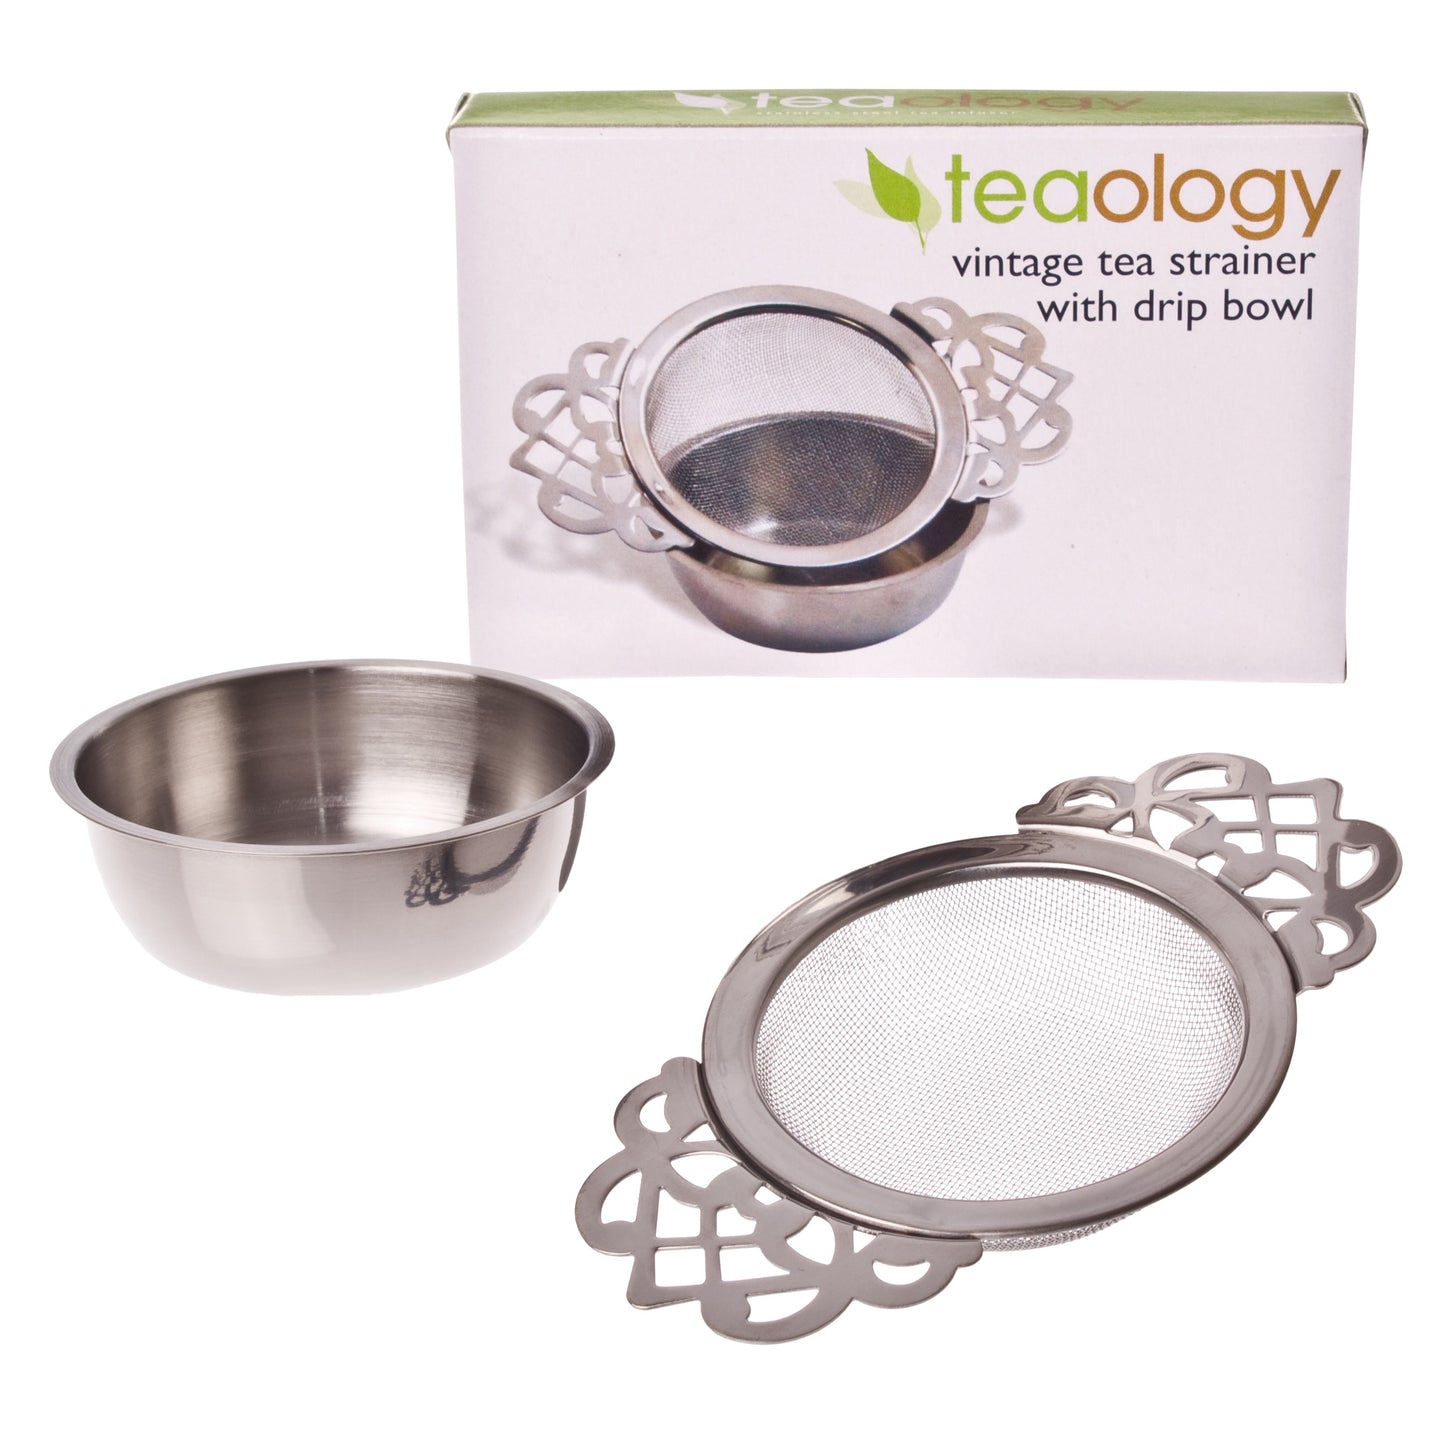 Teaology Vintage Tea Strainer With Drip Bowl – Stainless Steel #3369